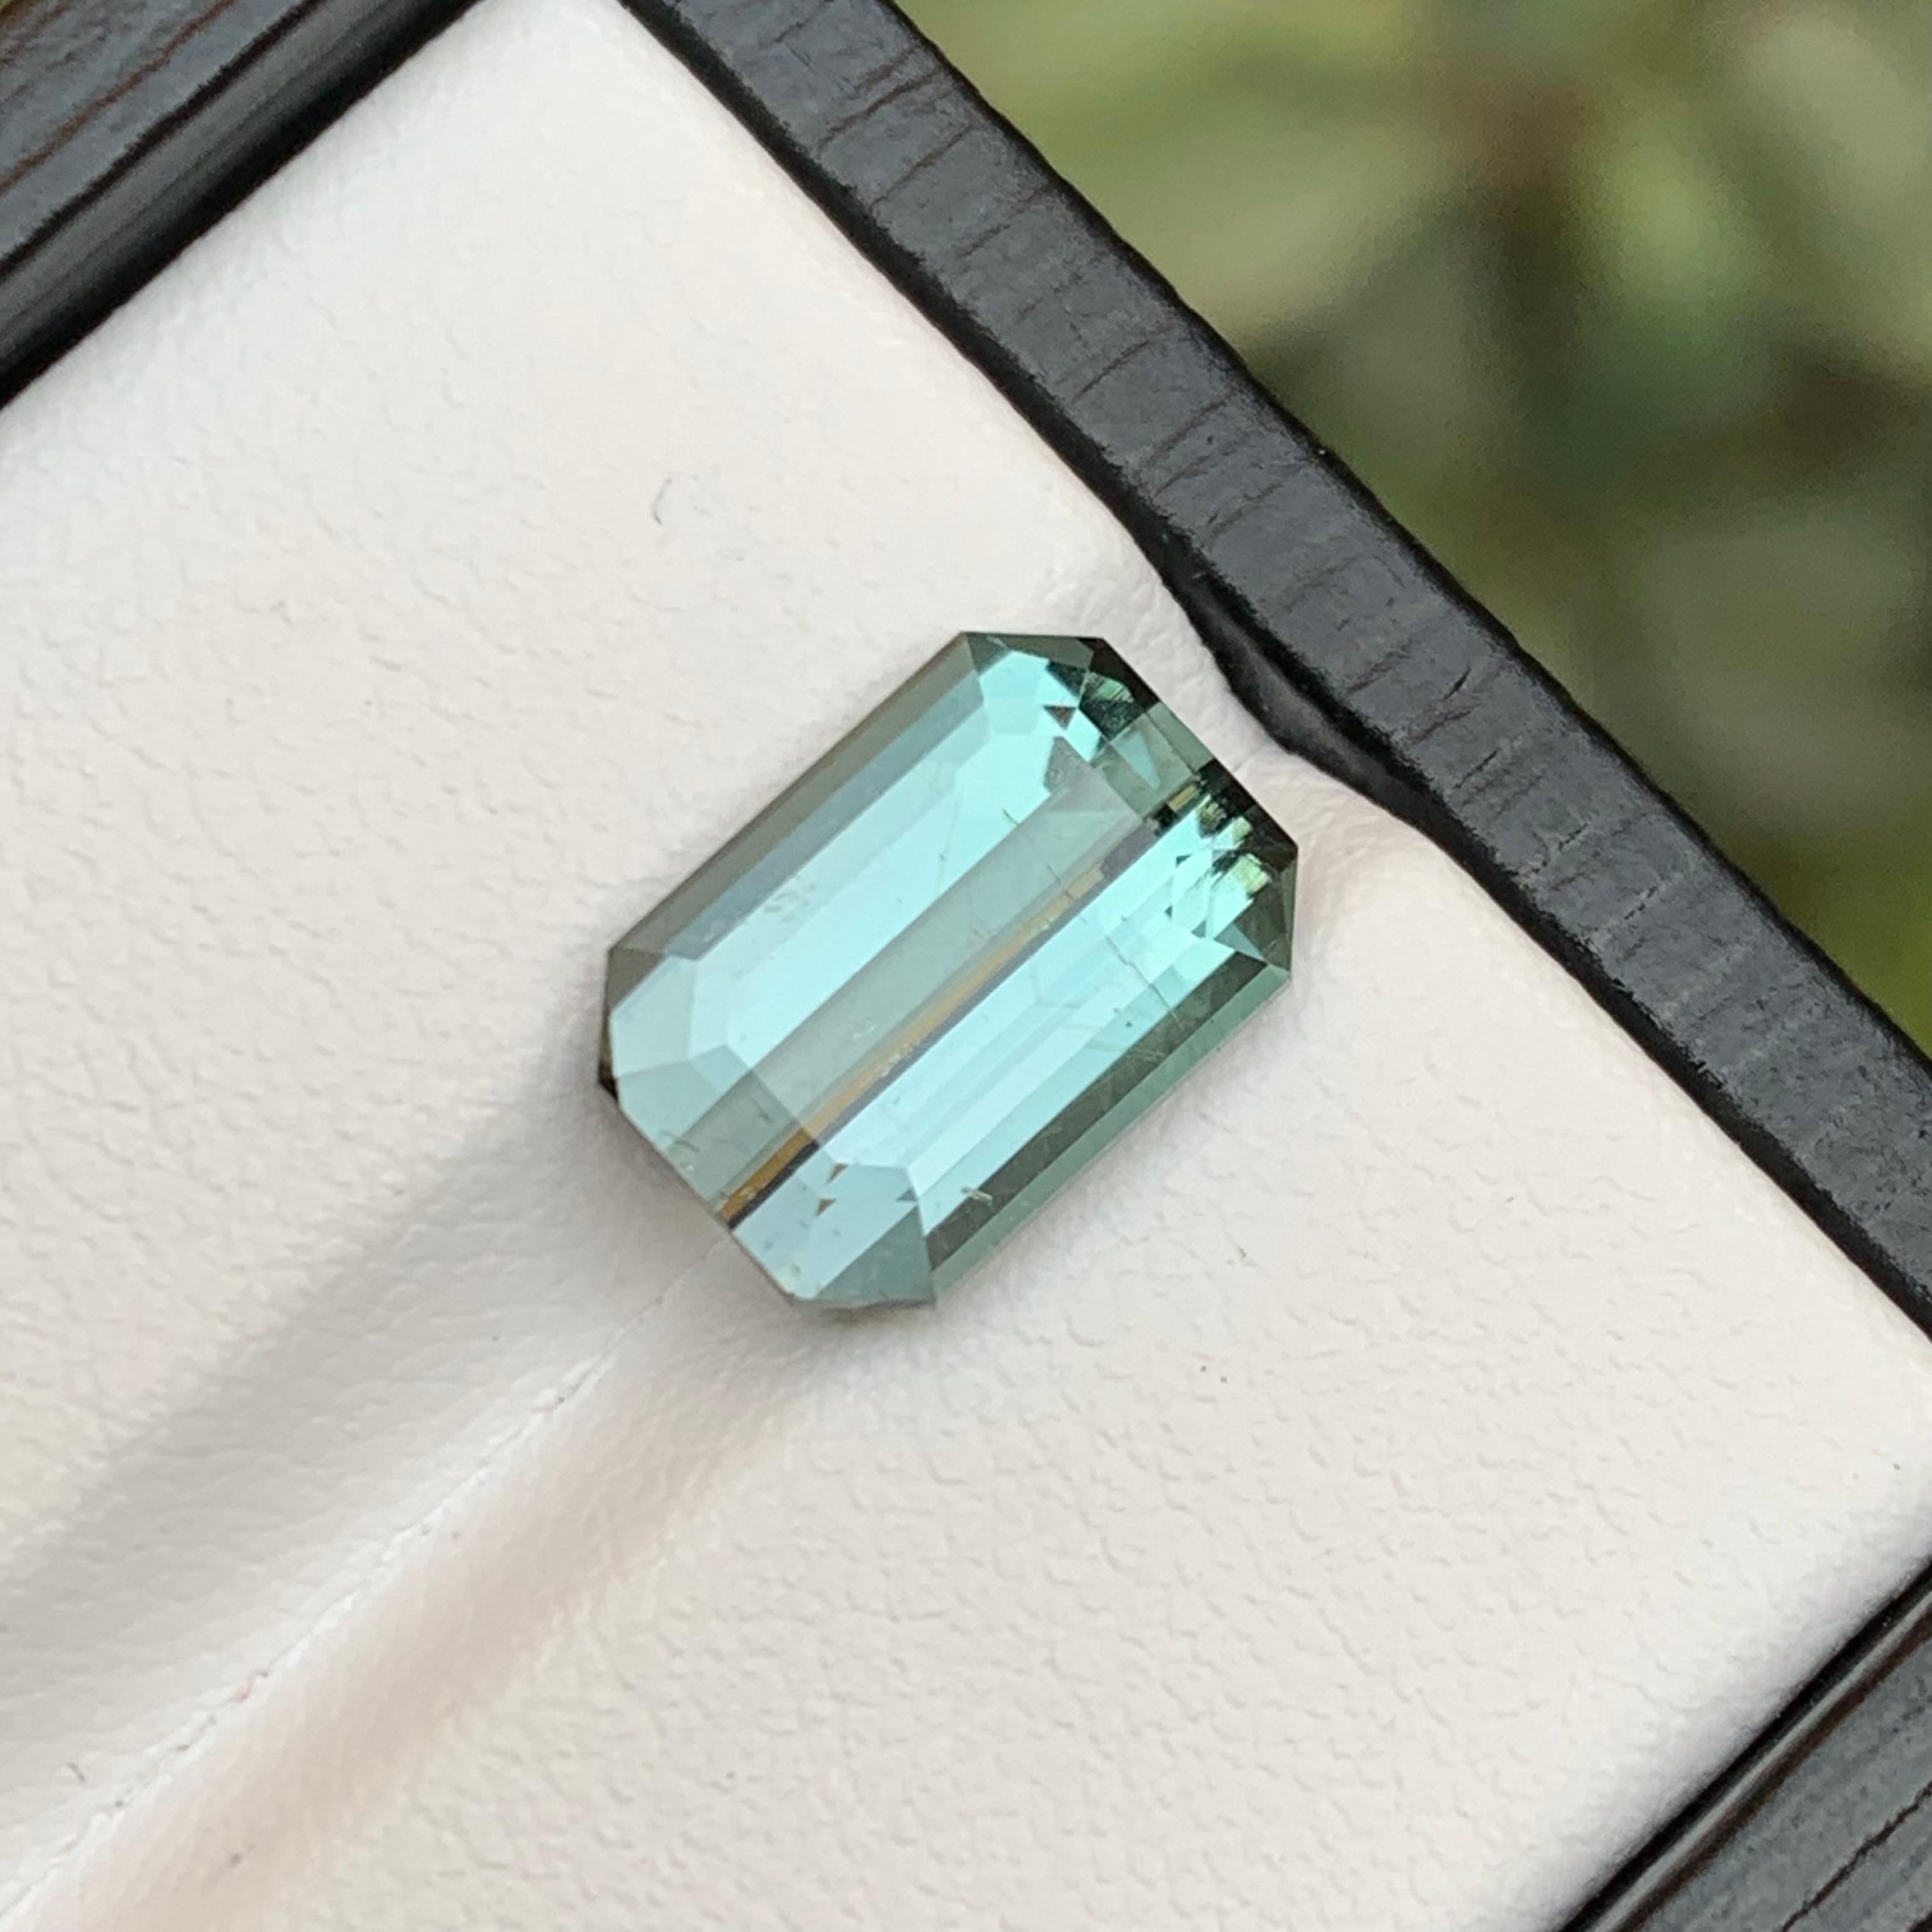 A very impressive Silver Grey Emerald Cut Natural Tourmaline Loose Gemstones from Afghanistan! This exquisite Emerald Cut gemstone is a radiant celebration of elegance and sophistication. Mined in the heart of Afghanistan, its mesmerizing Silver